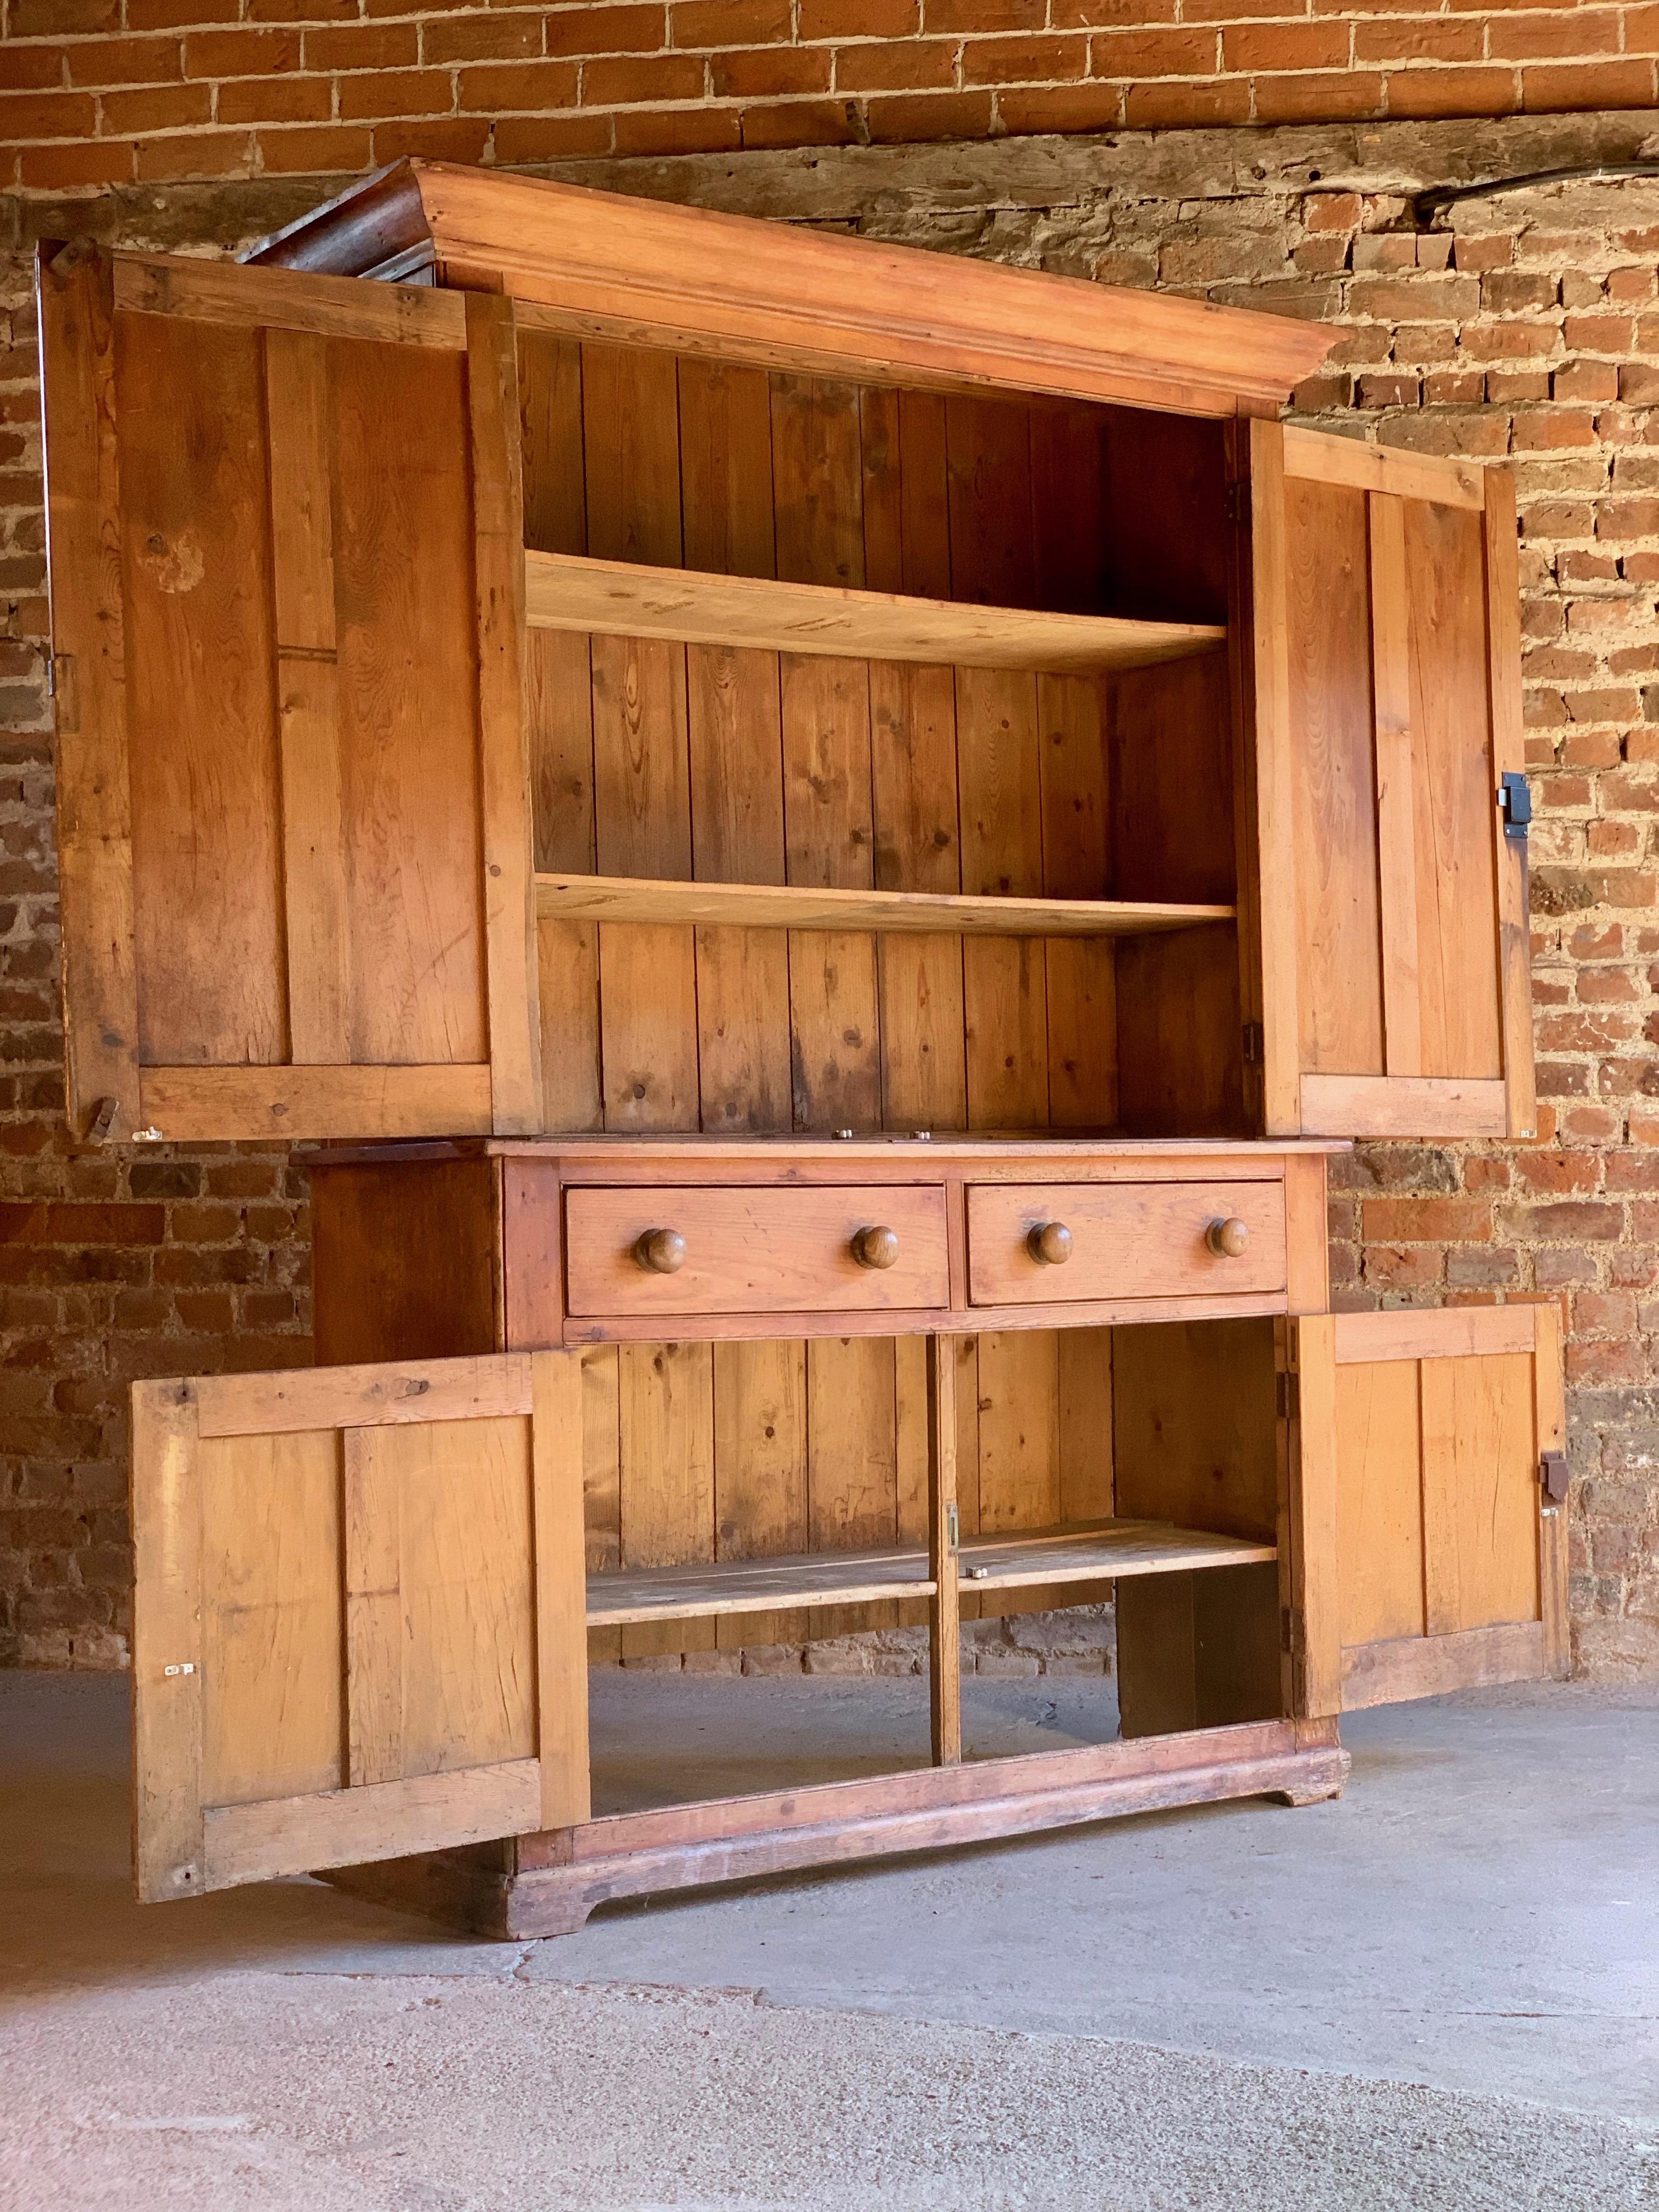 British Victorian Pine Housekeepers Cupboard Pantry Antique 19th Century, circa 1895